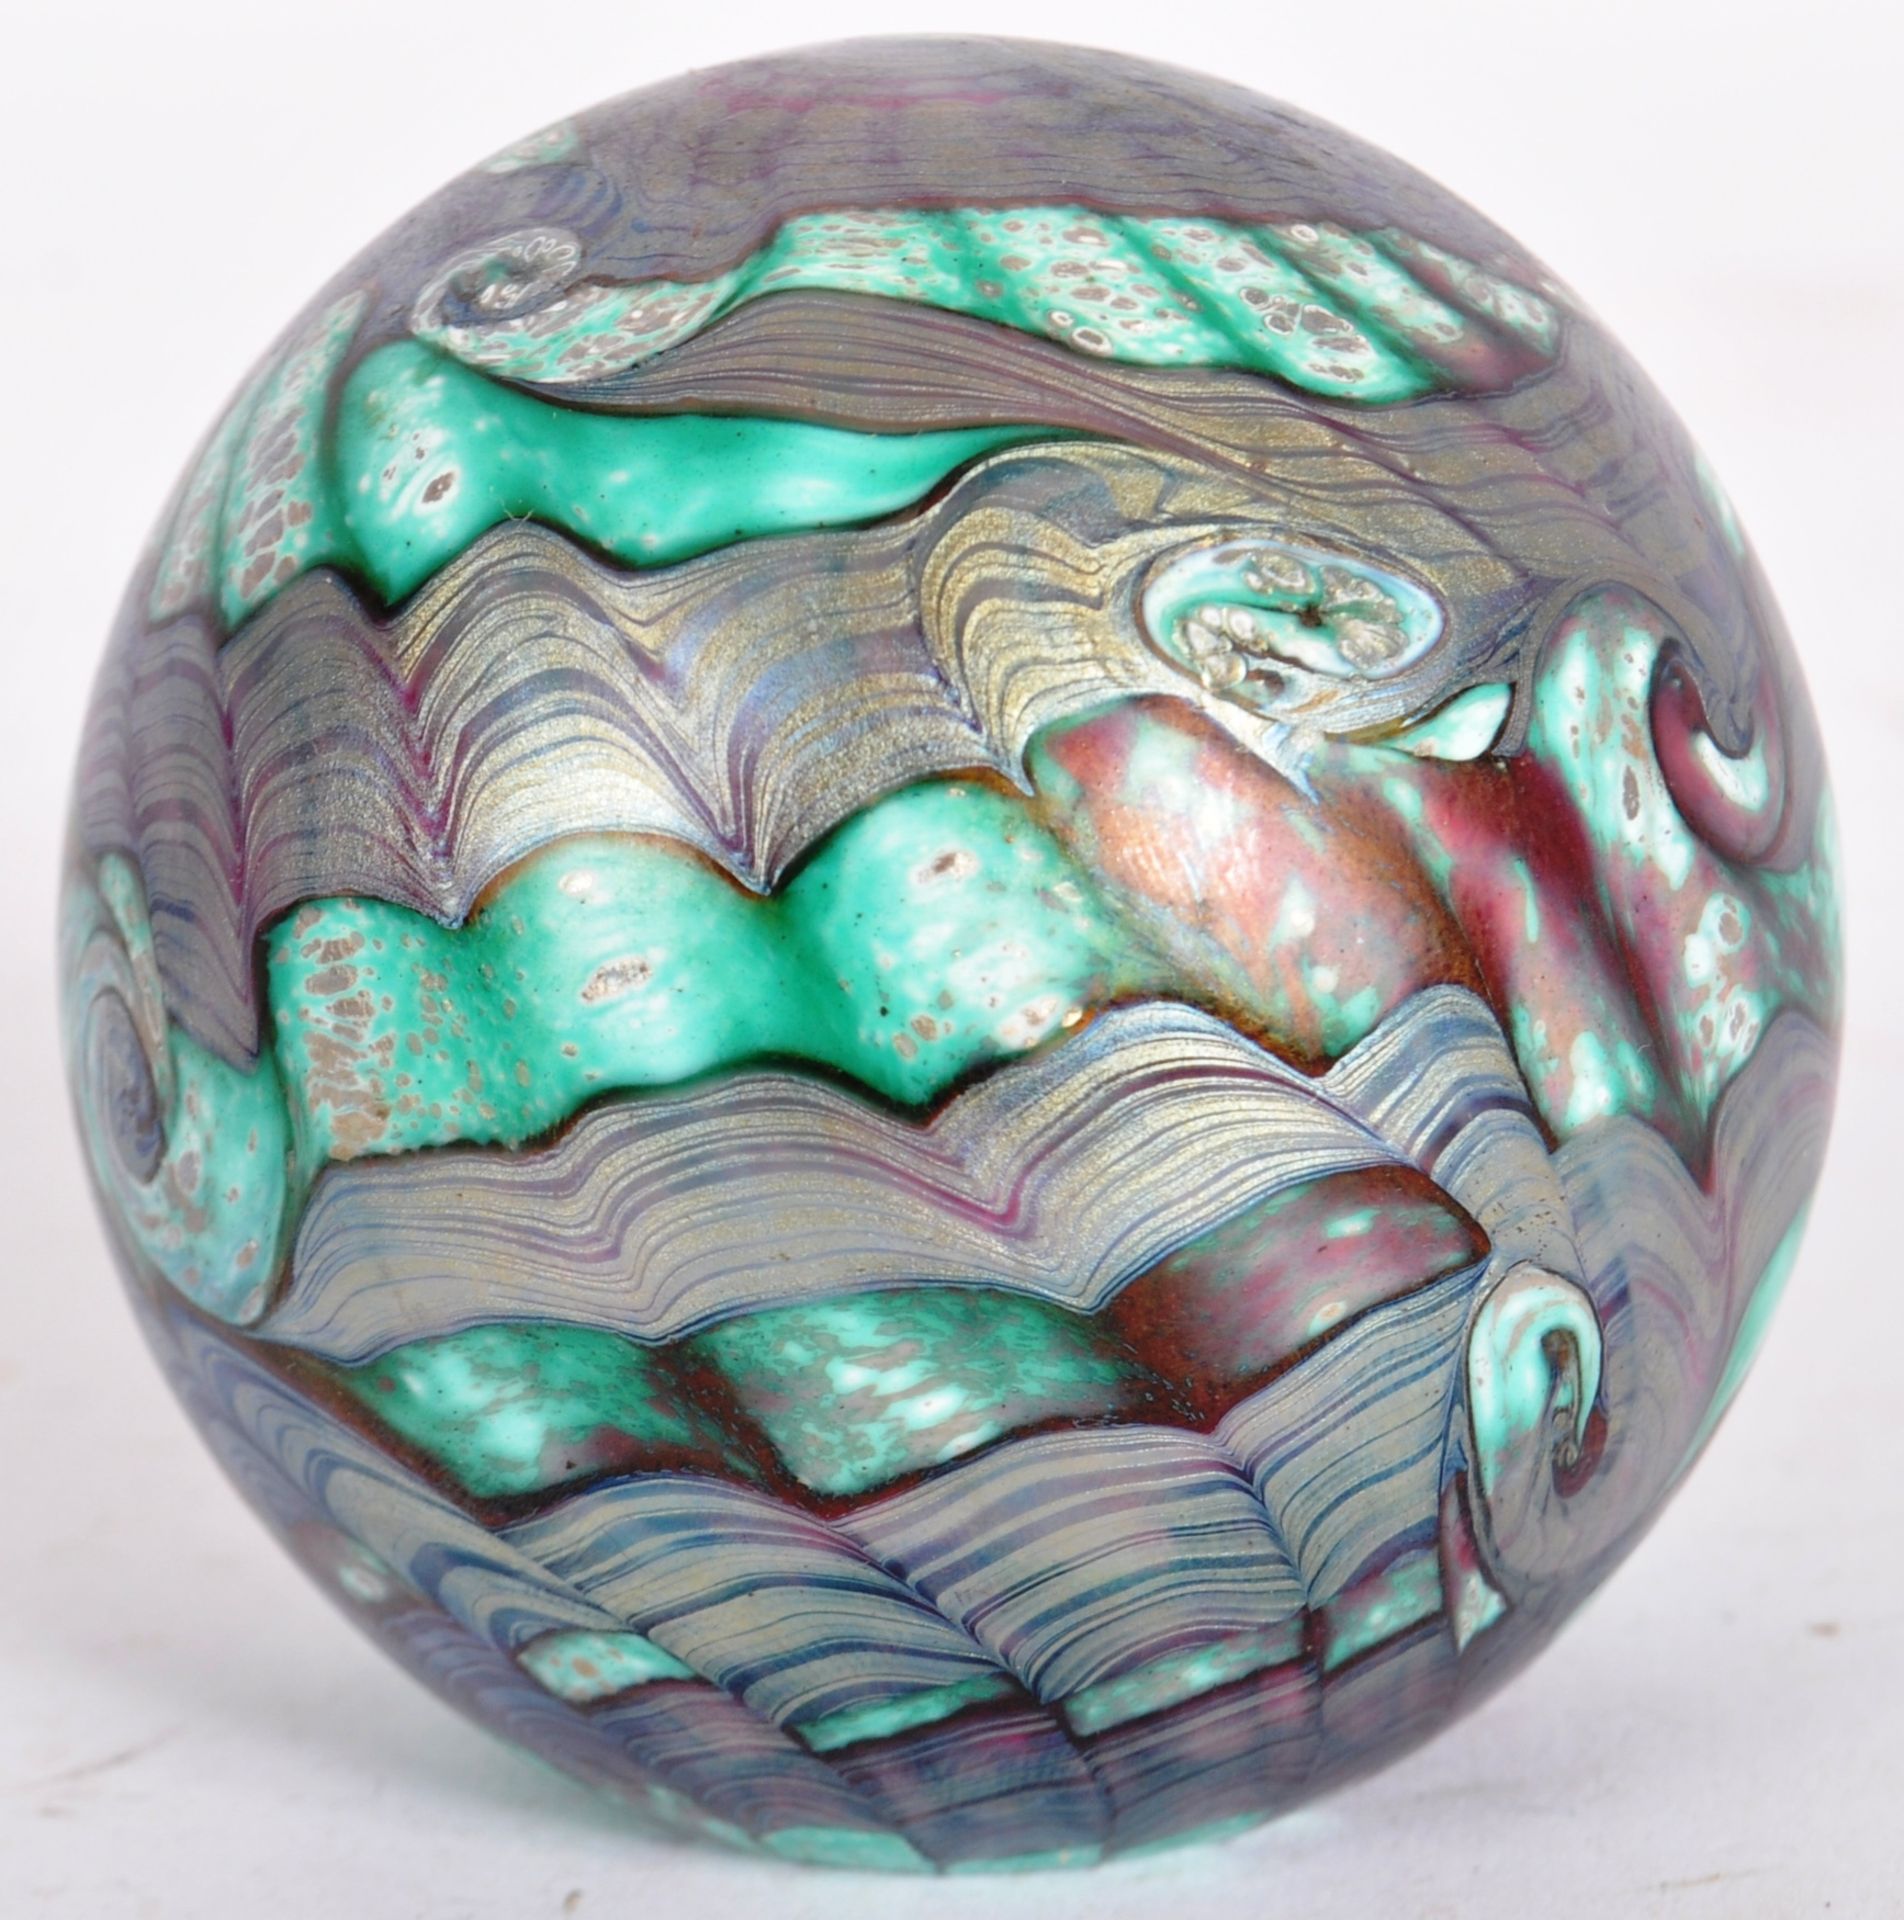 MICHAEL HARRIS FOR ISLE OF WIGHT - GLASS PAPERWEIGHT - Image 5 of 9